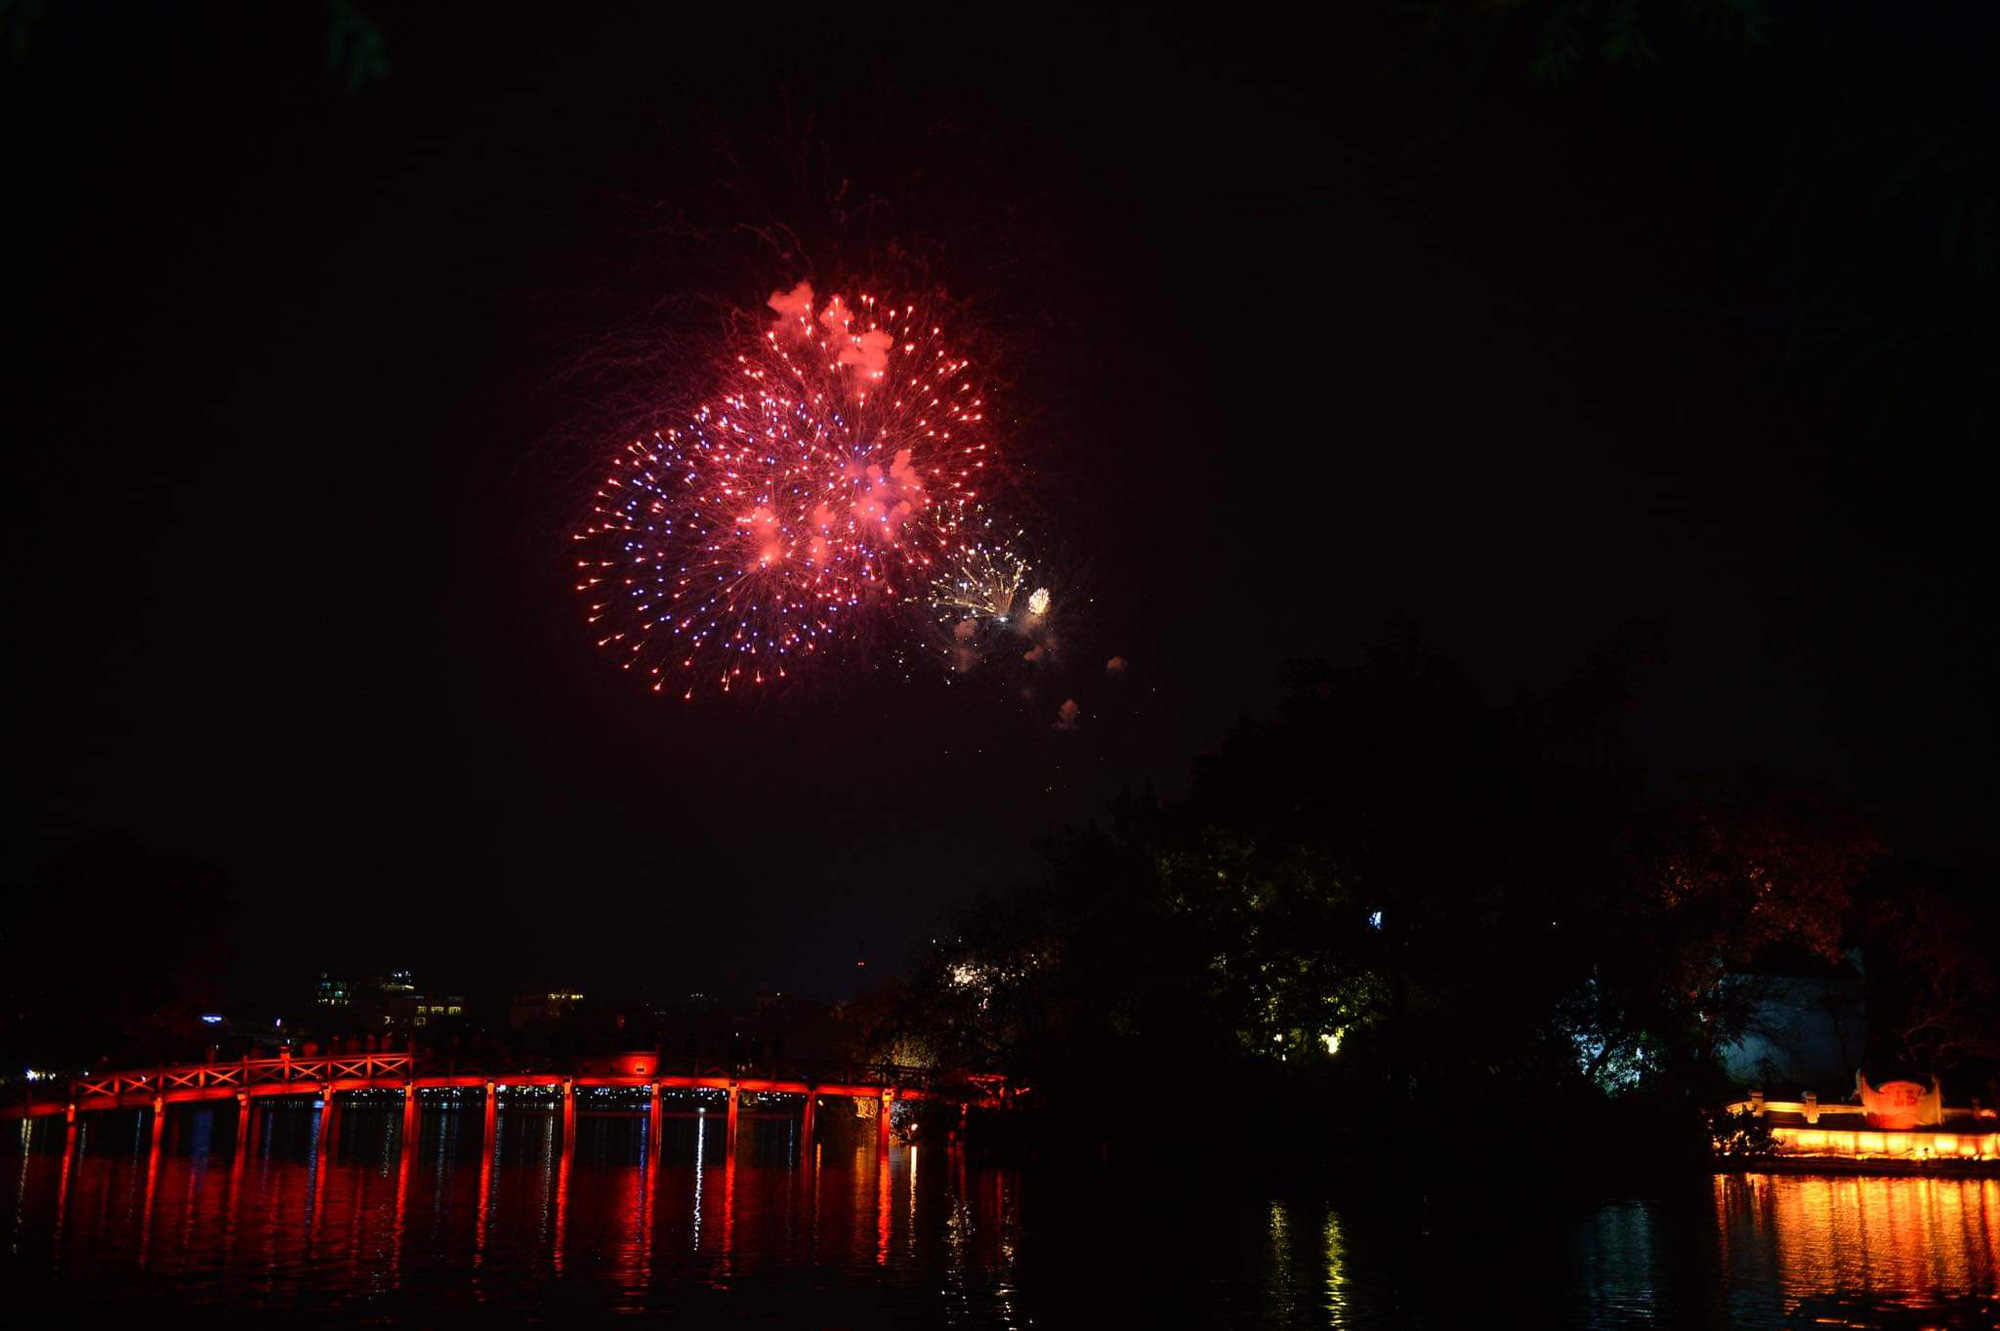 No gatherings, just one pyrotechnic display for Tet as Hanoi attempts to contain COVID-19